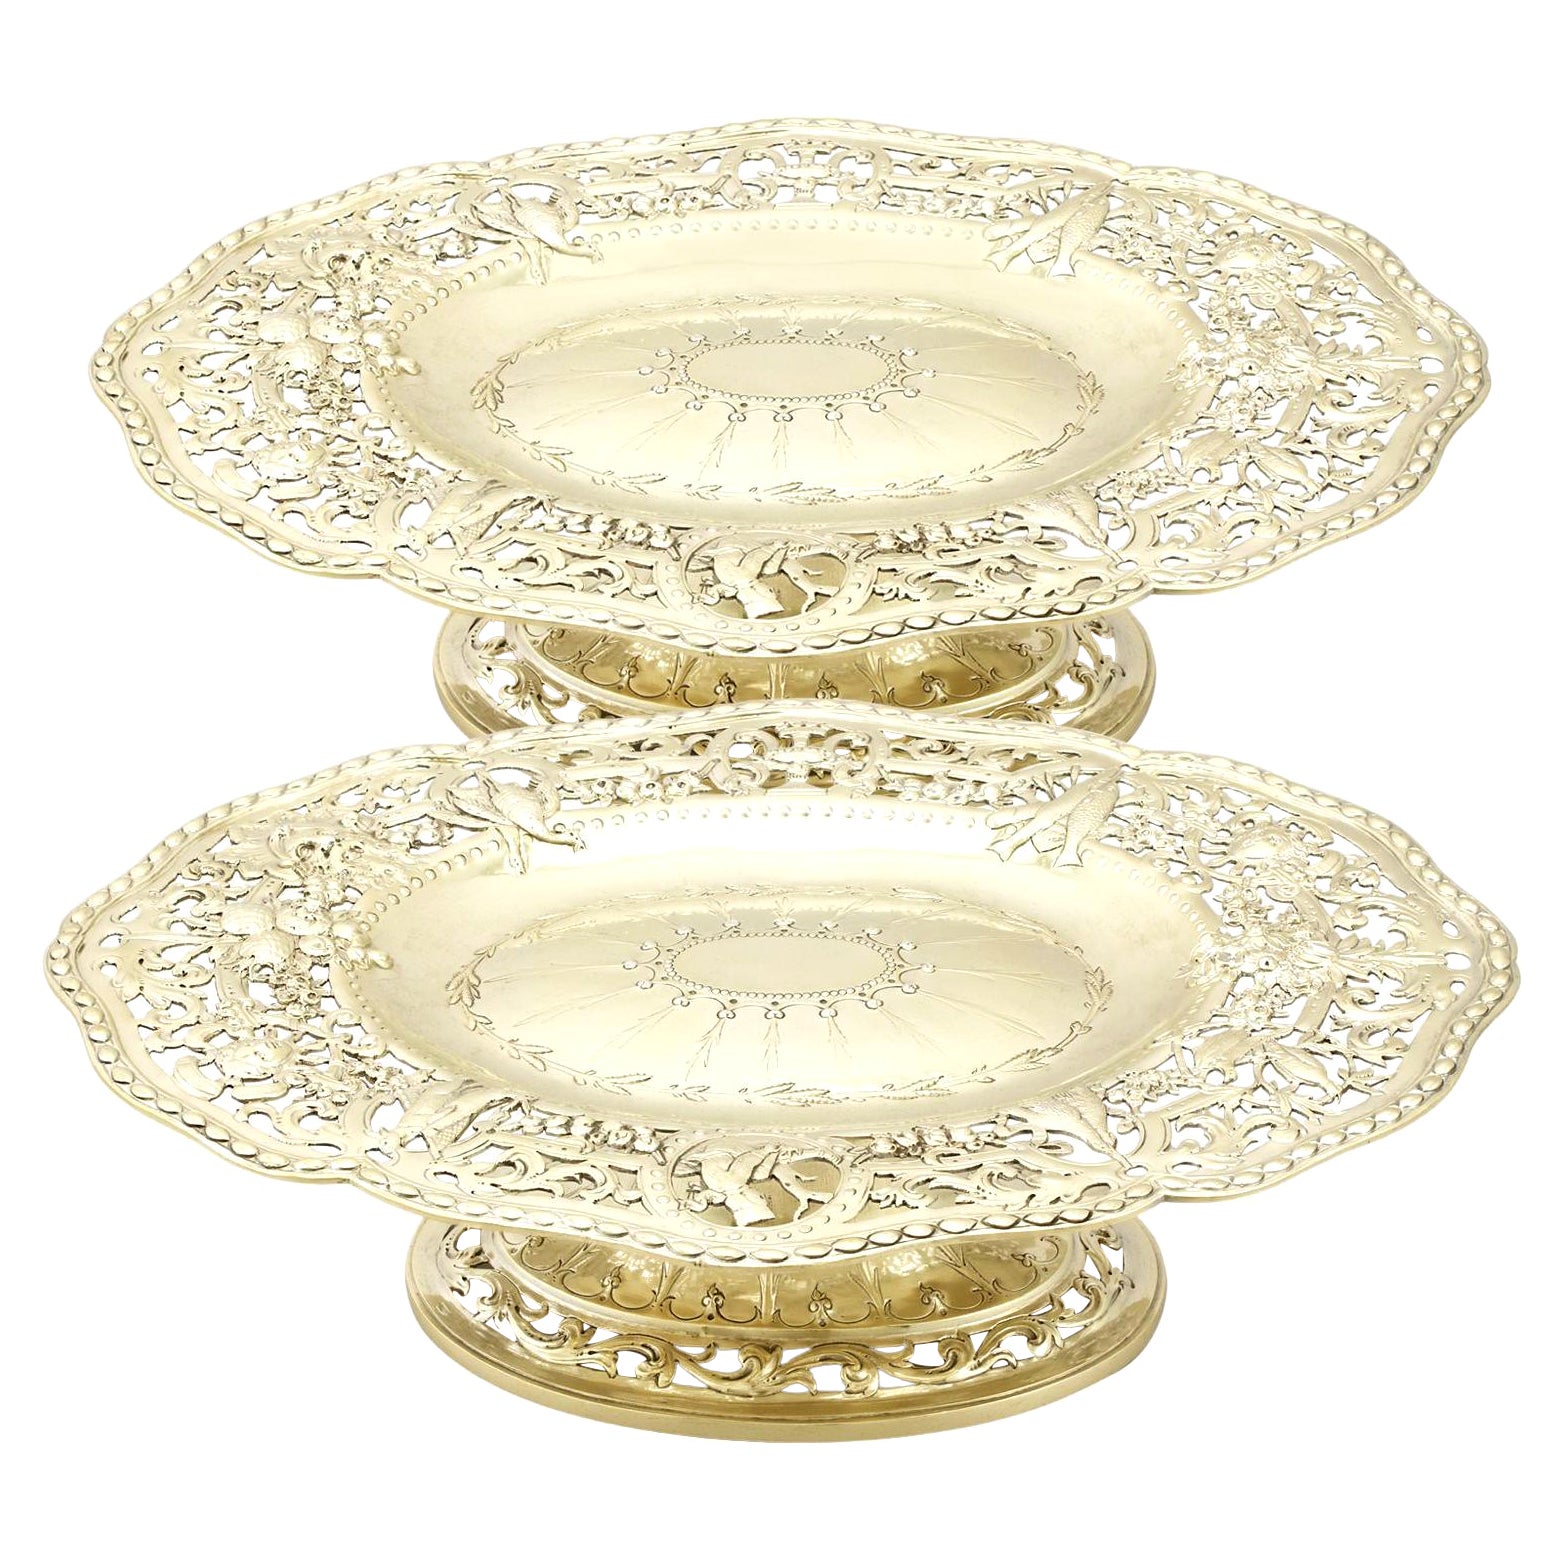 1880s Antique Victorian Sterling Silver Gilt Tazzas / Centerpieces For Sale